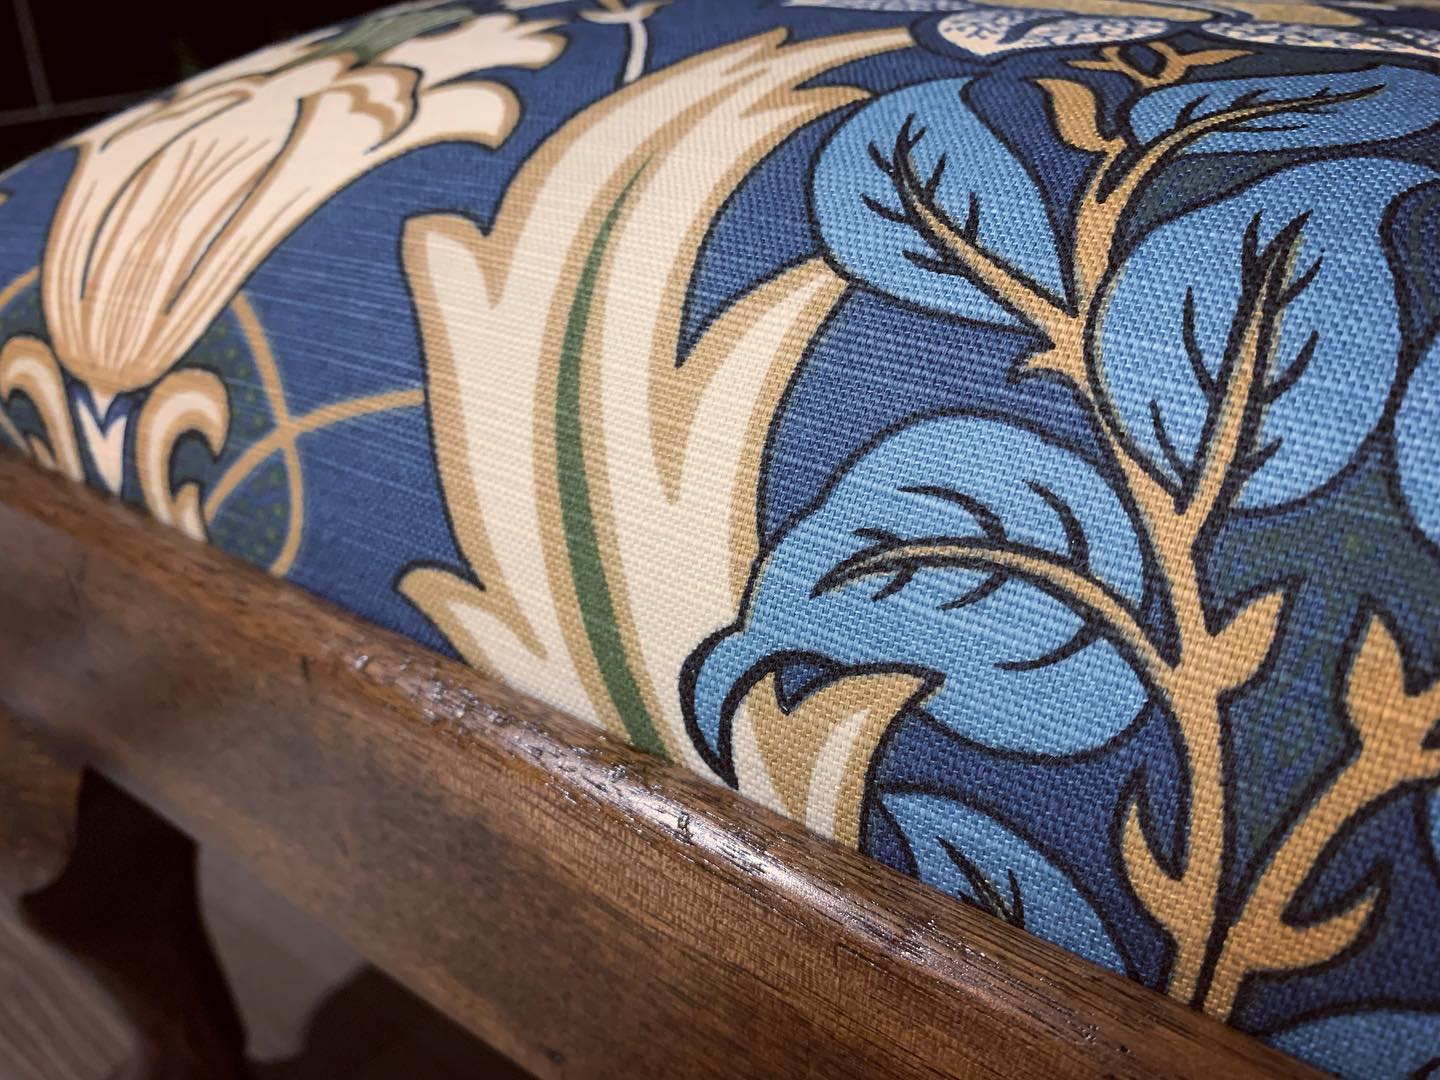 We’ve been restoring a lovely old footstool! Can’t wait to find it a new home! Photos of finished article to follow